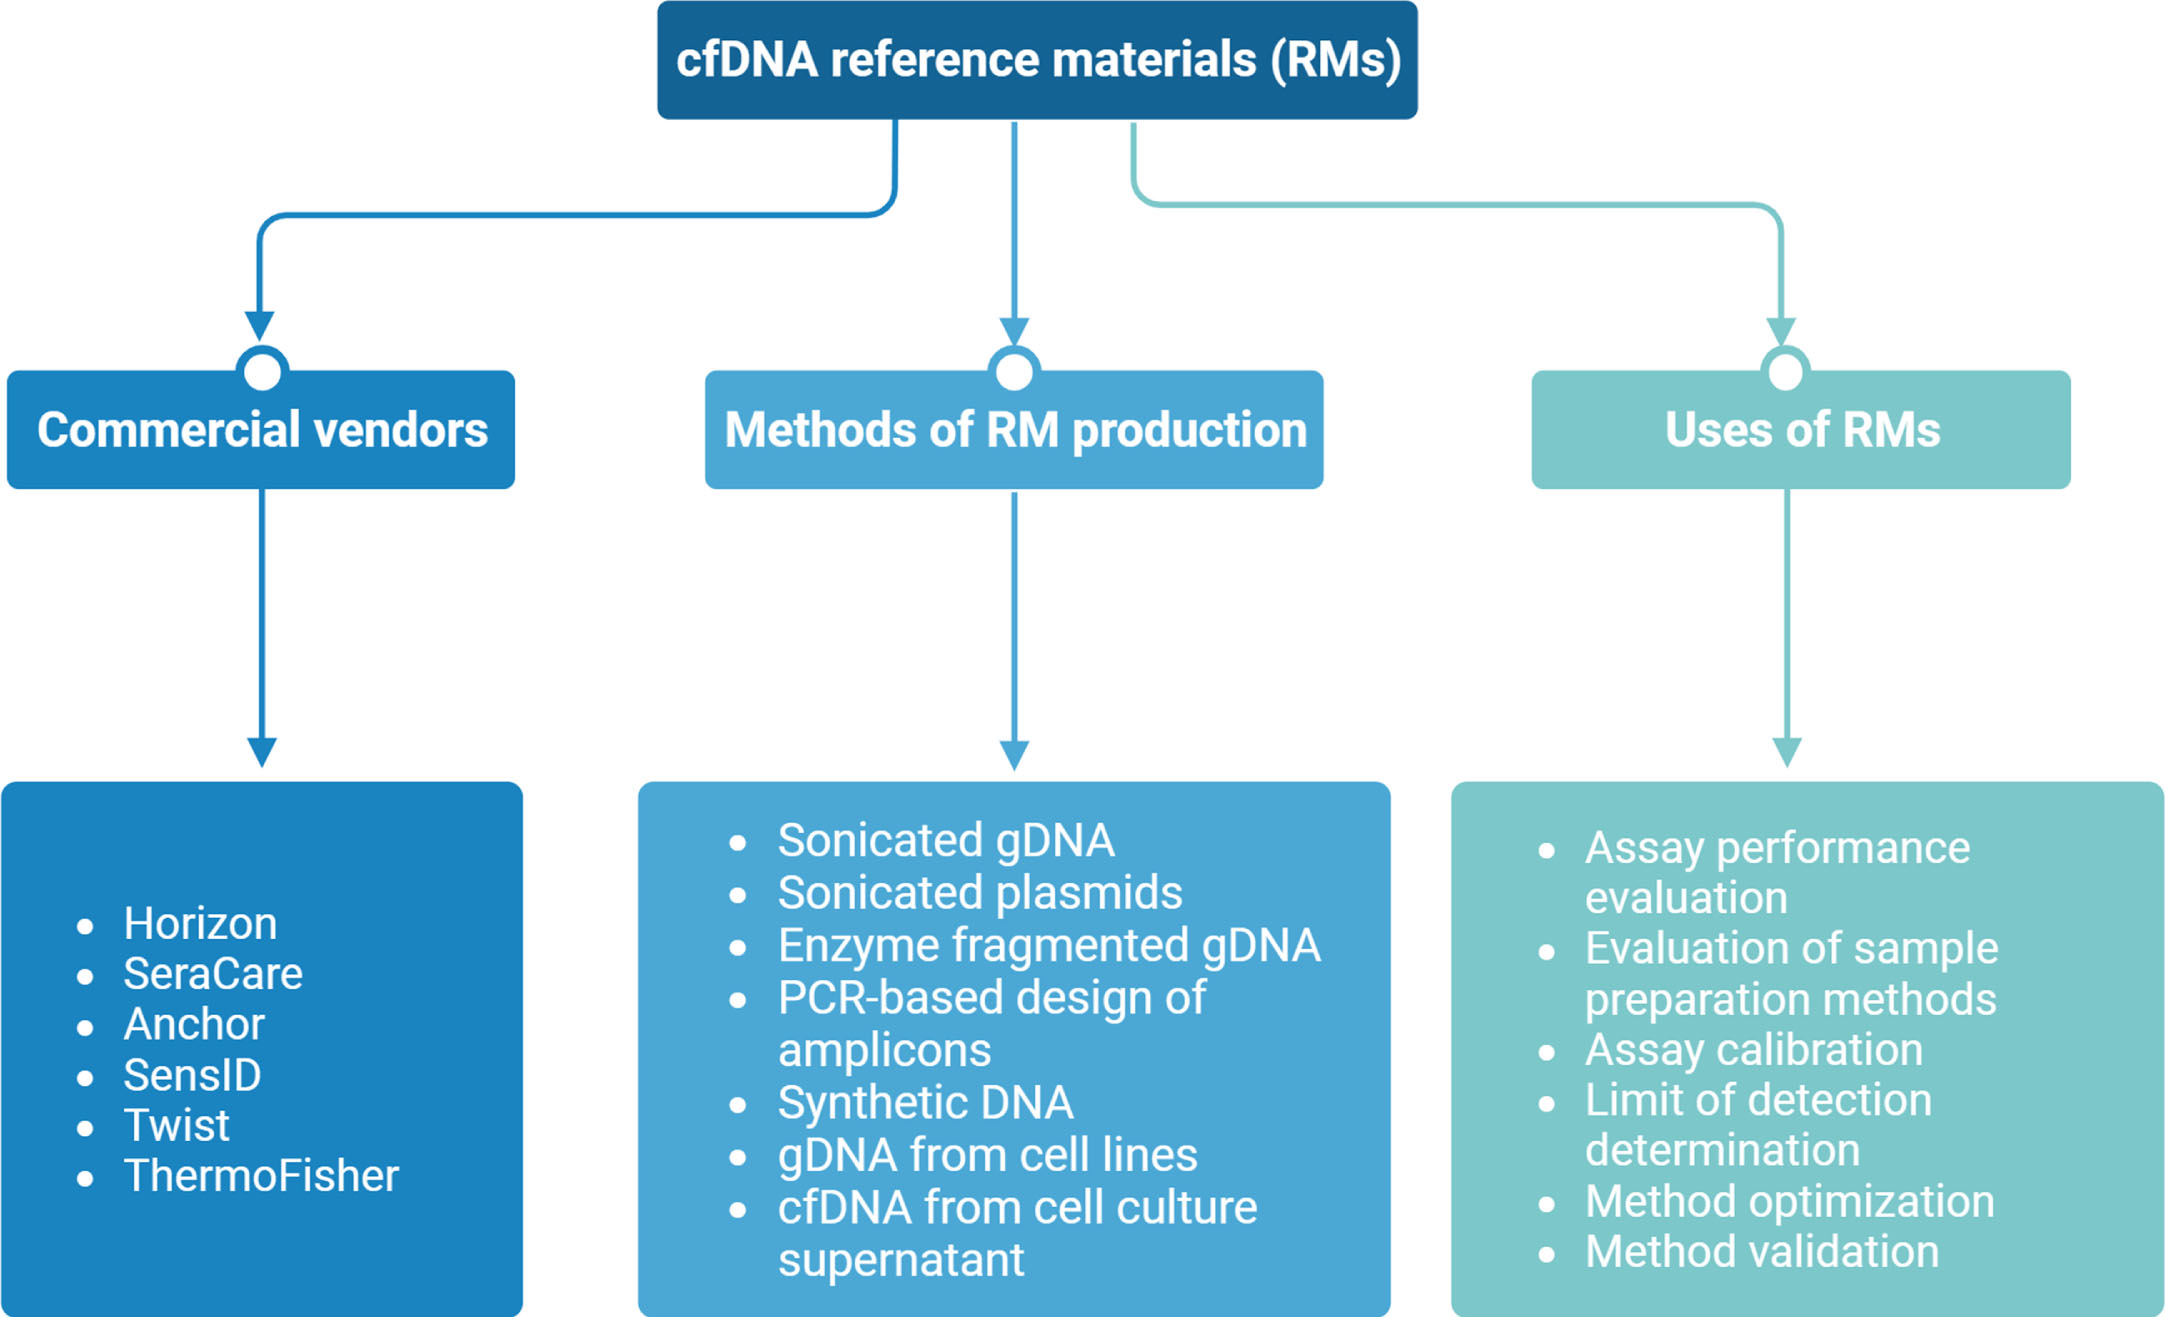 Overview of circulating tumor DNA (ctDNA) reference materials (RMs) provided by commercial vendors, highlighting production methods, sources, and current applications.